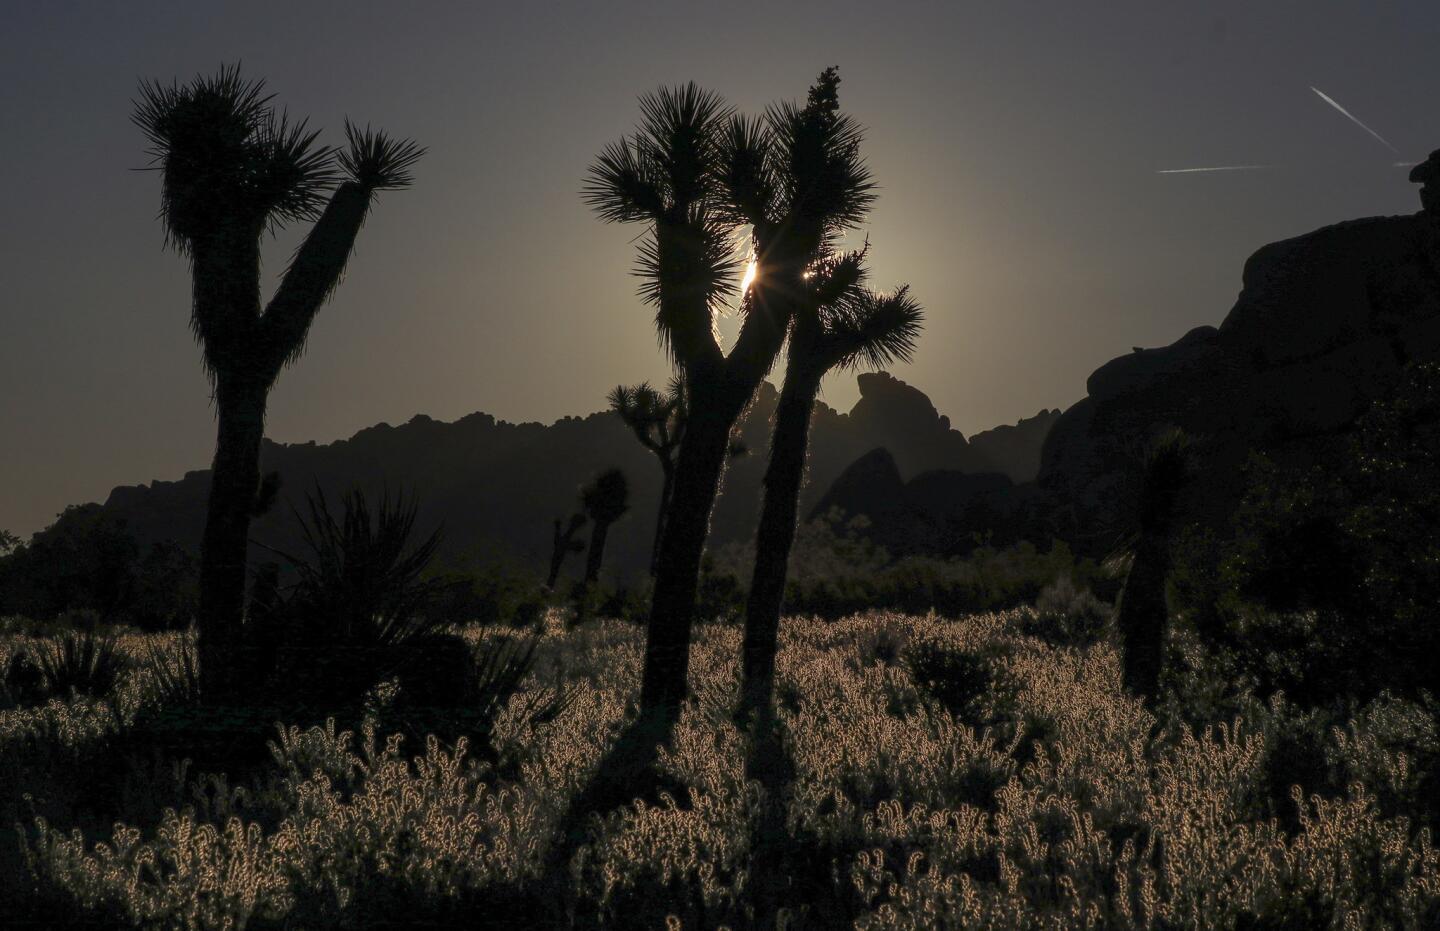 Joshua trees are backlit by the sunrise while wildflowers bloom at their feet in Joshua Tree National Park.